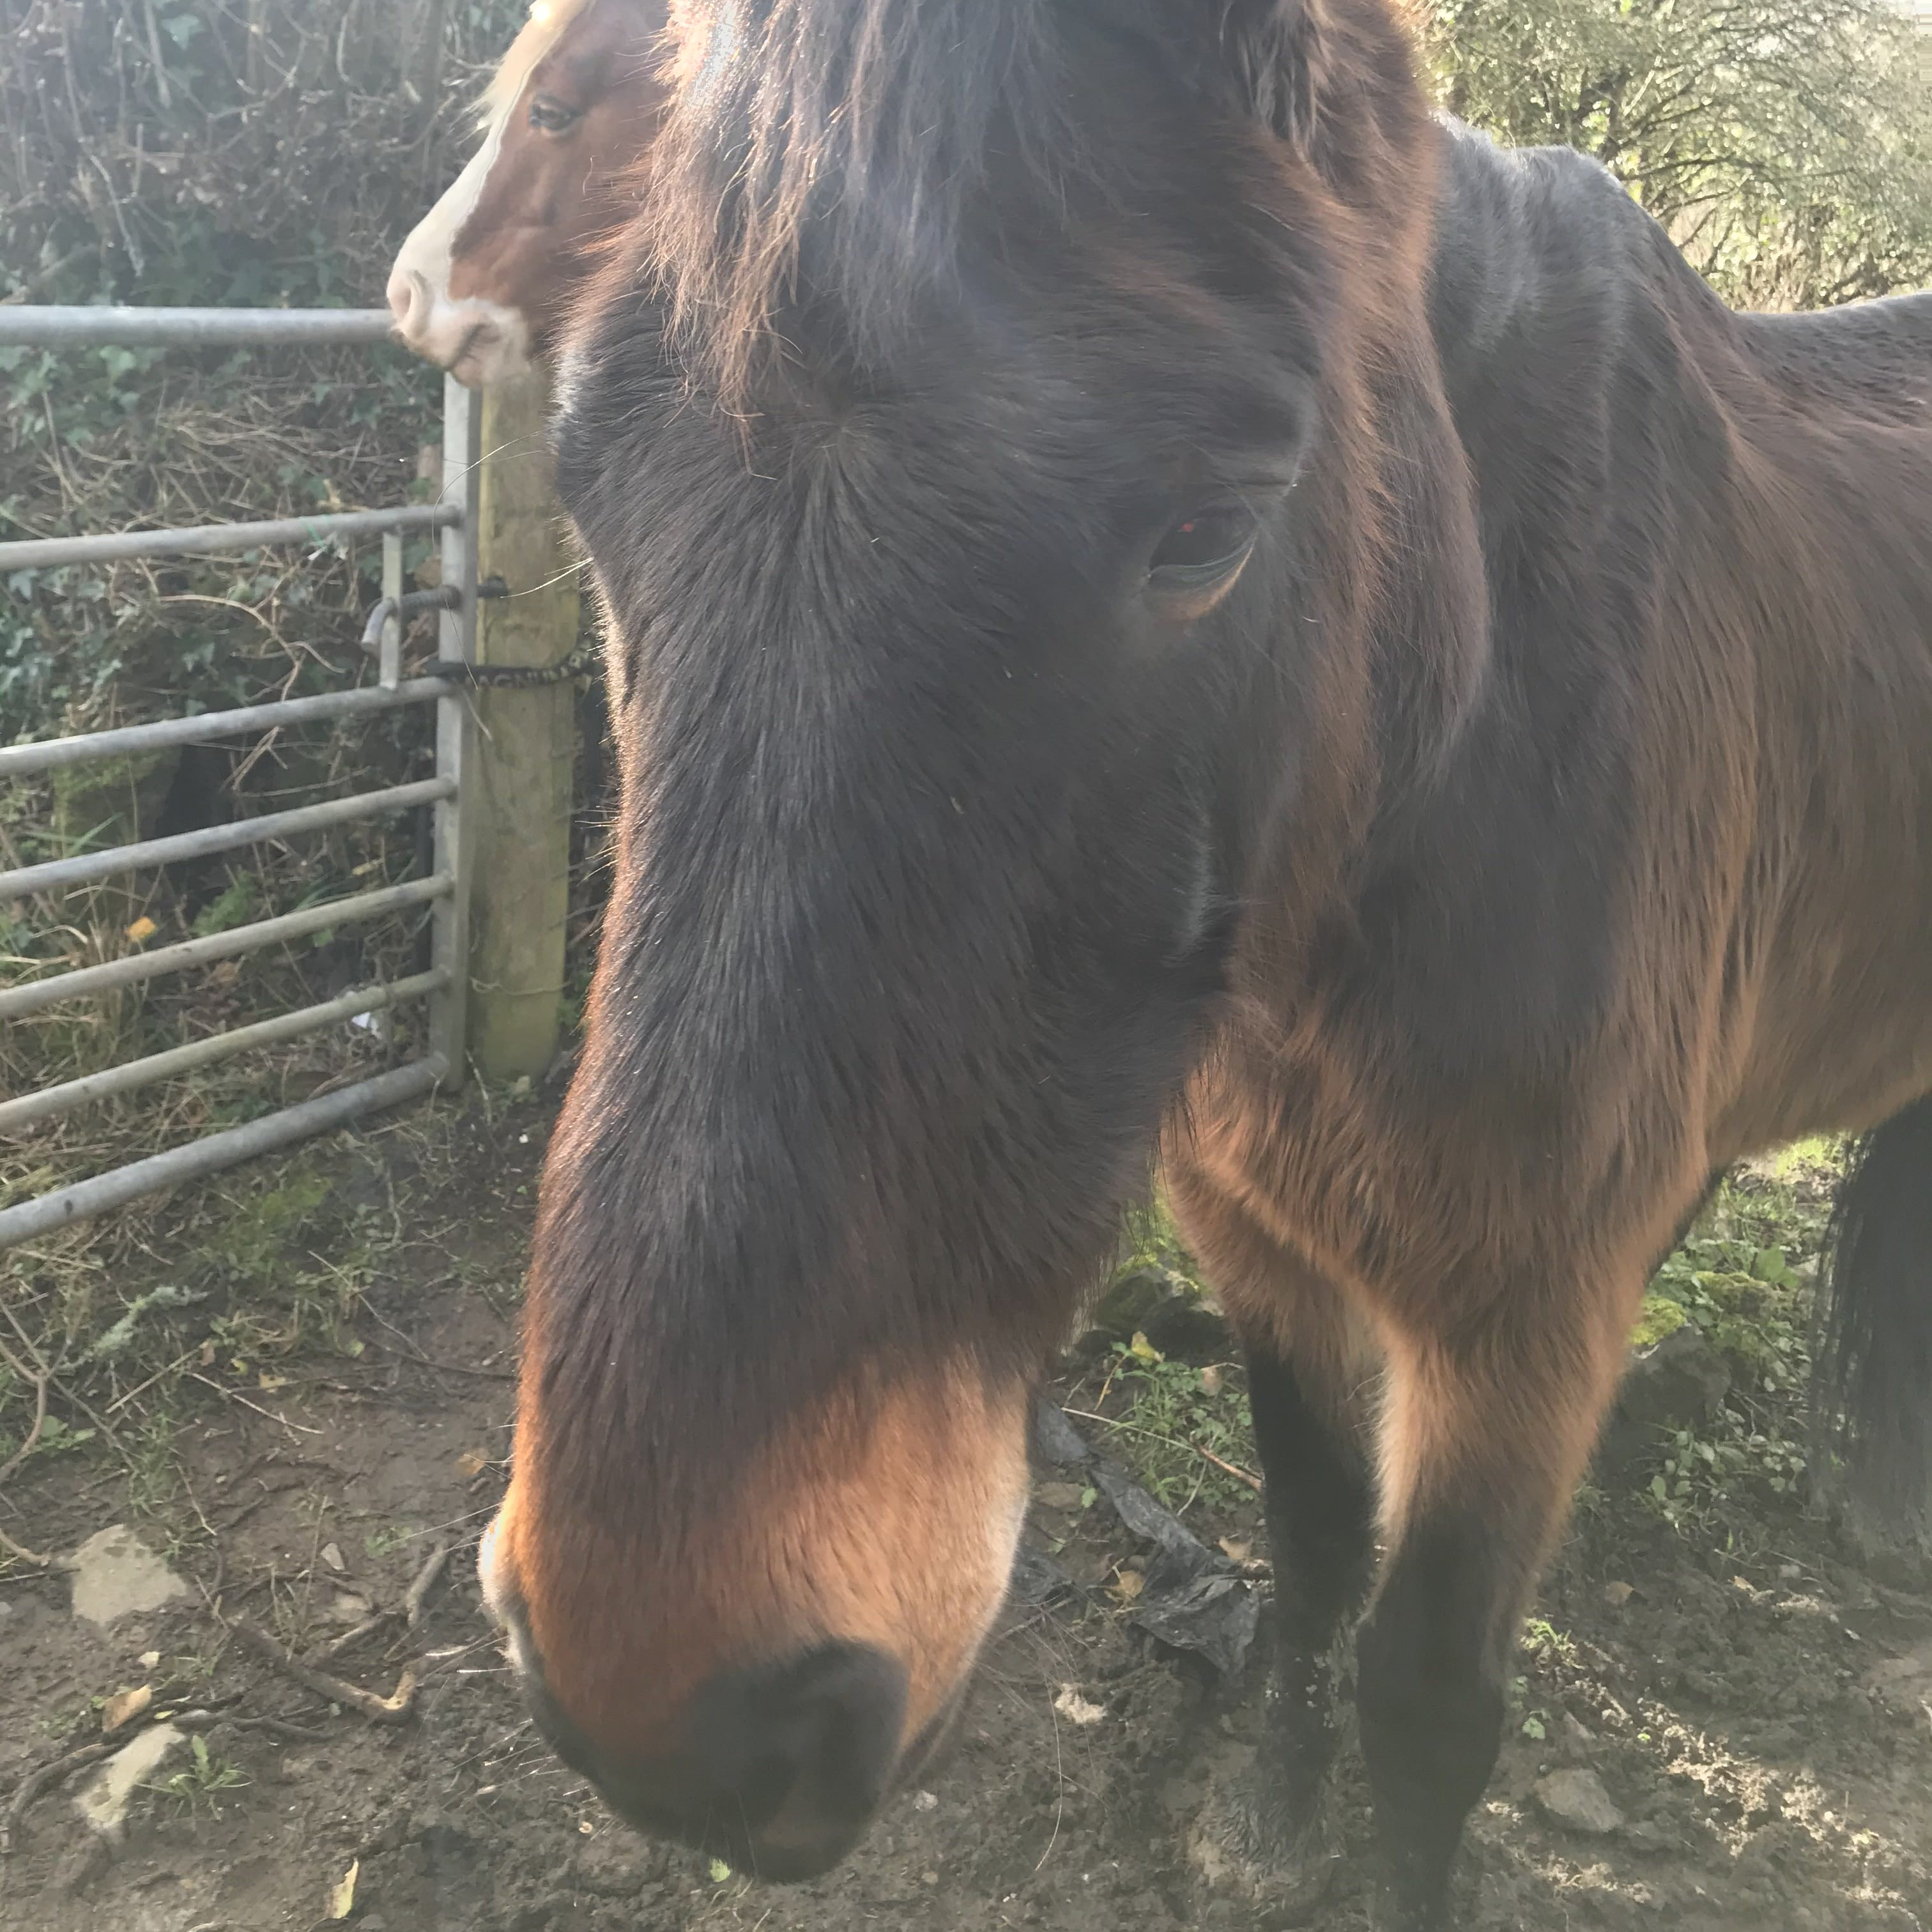 12-year-old bay gelding horse called Ben, who was found in a field in an emaciated condition with severe rain scald on his back